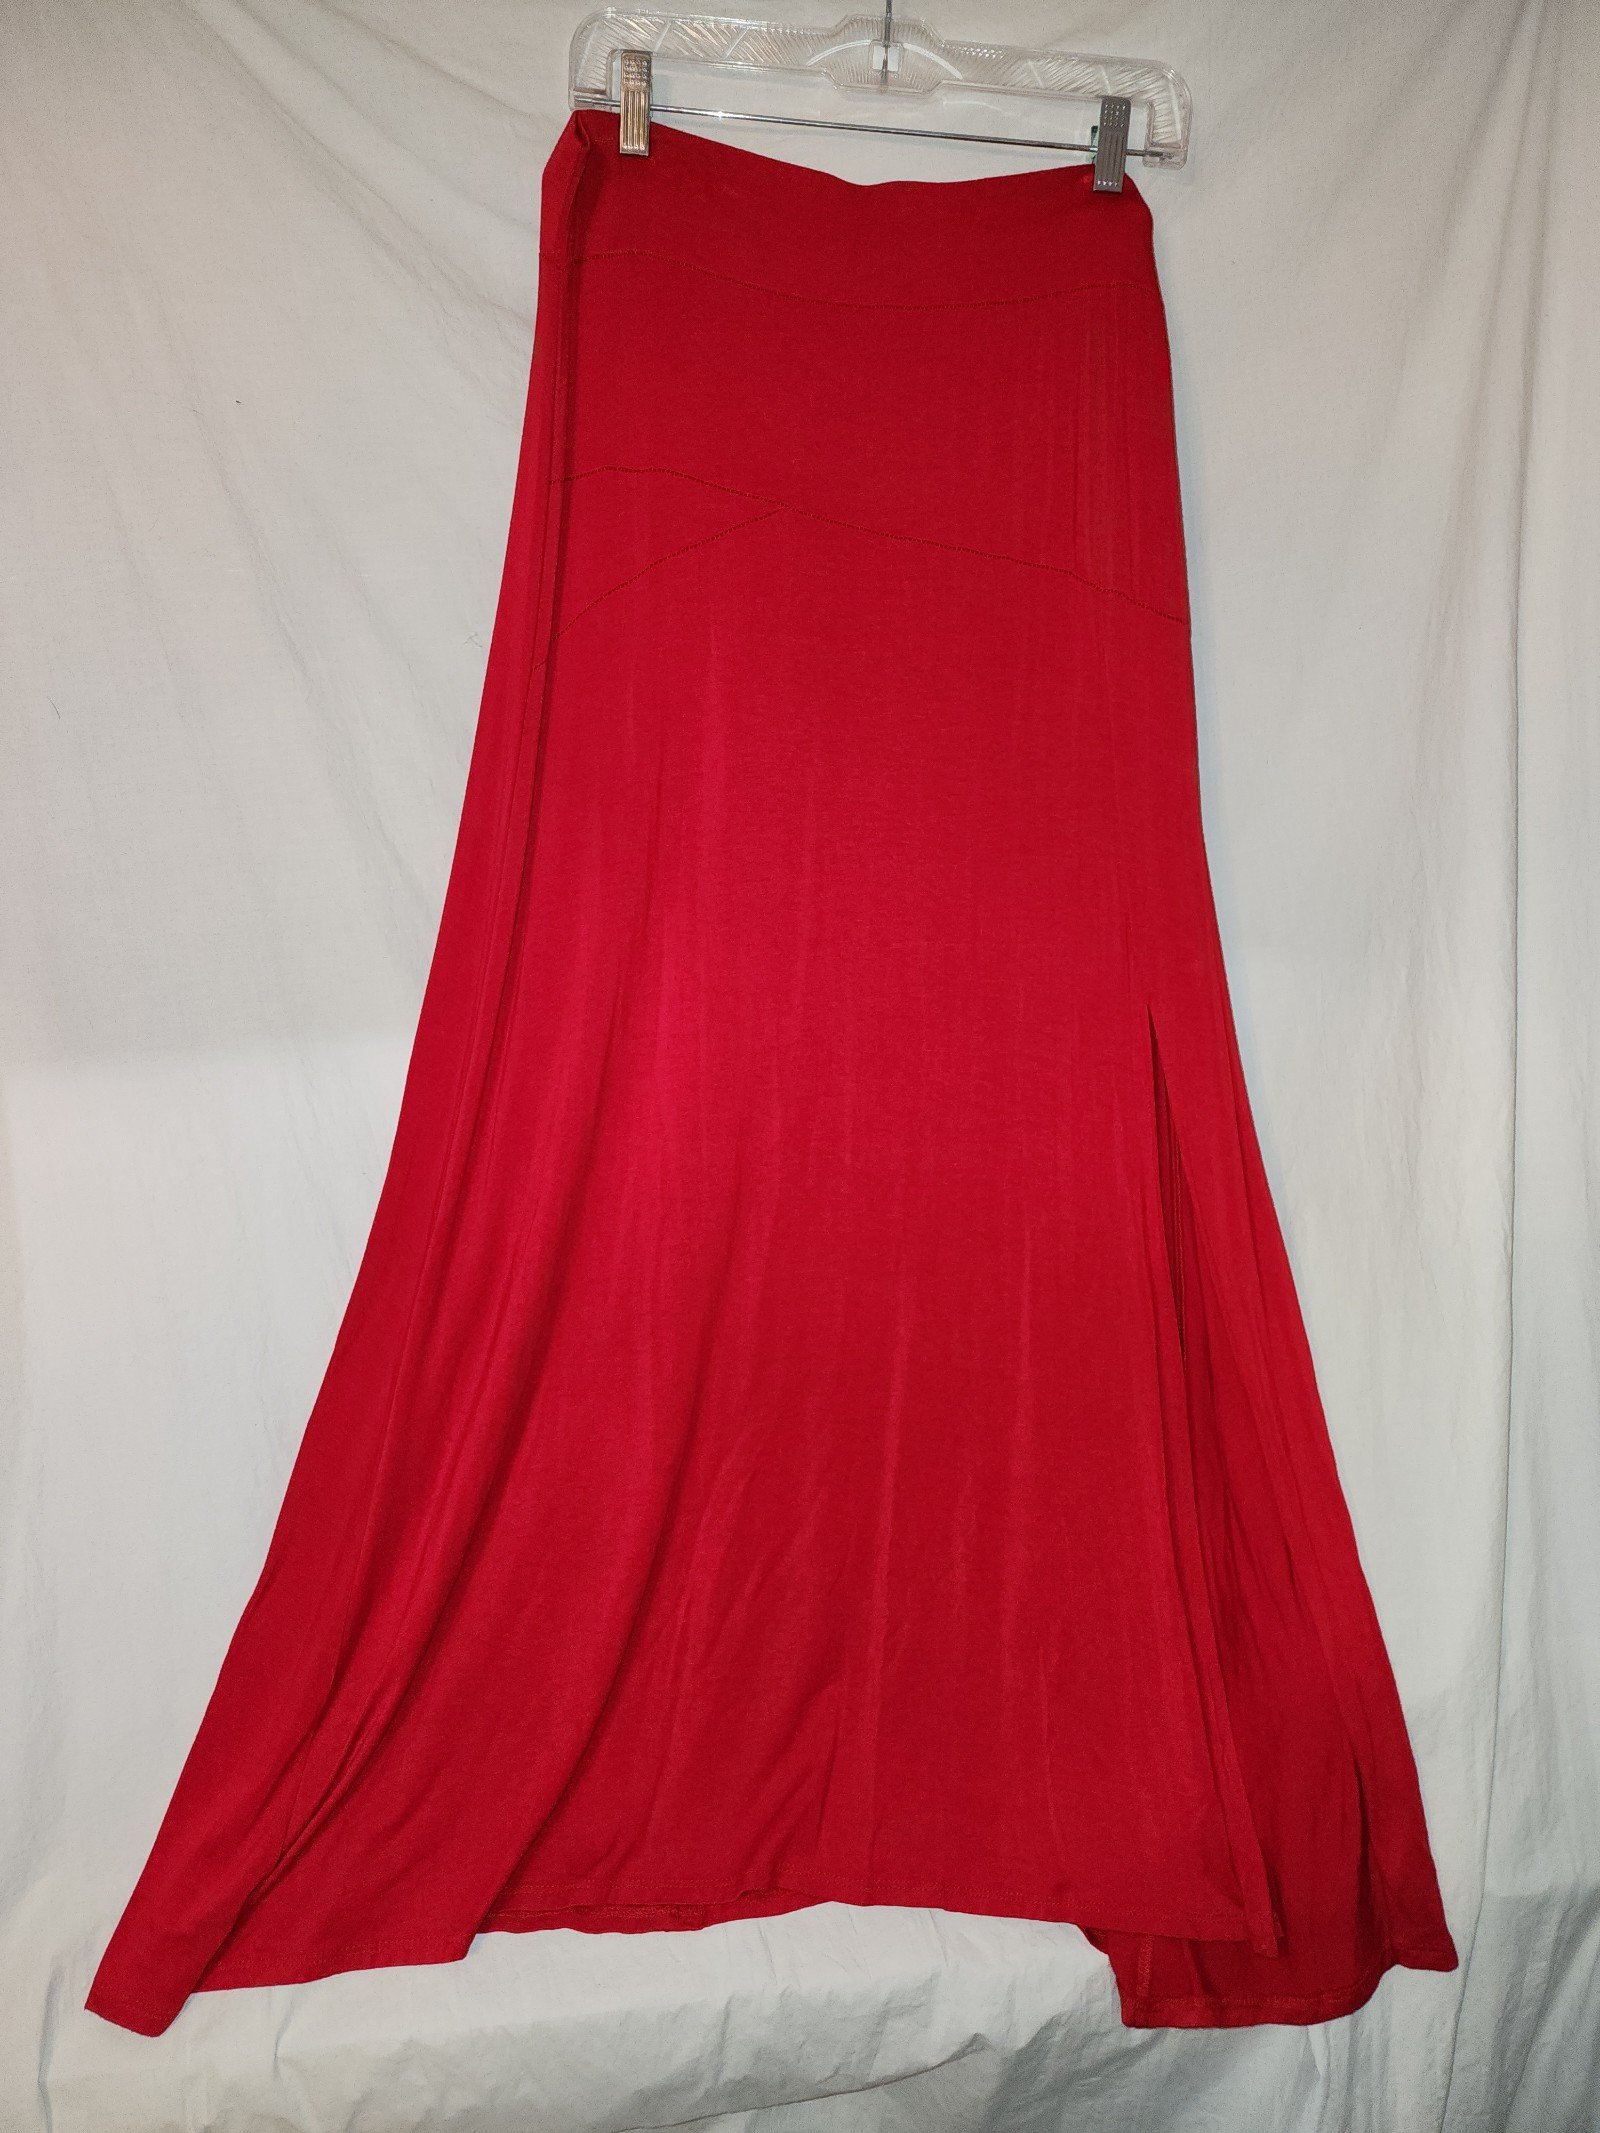 Wholesale price Roz & ali womens size large red long si